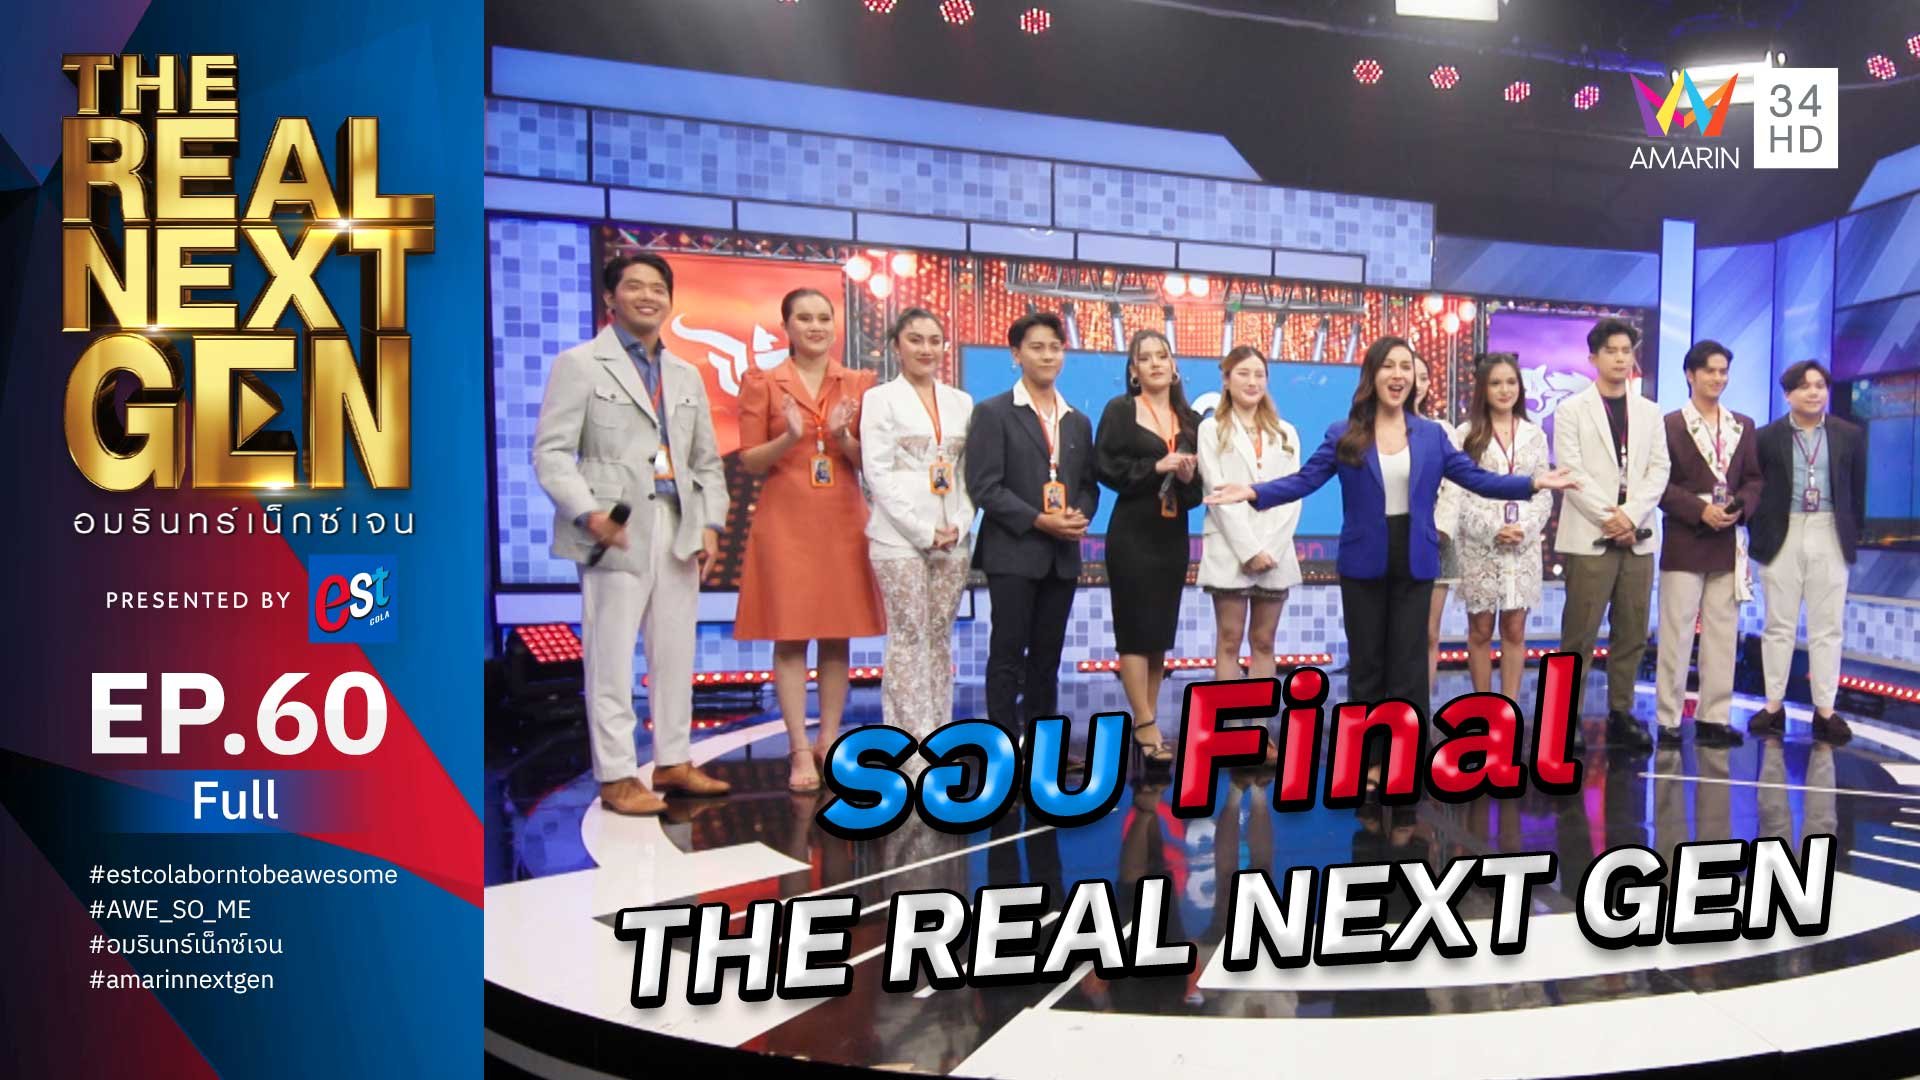 The Real Next Gen อมรินทร์เน็กซ์เจน | EP.60 THE REAL NEXT GEN อมรินทร์เน็กซ์เจน Presented By est cola  | 10 ธ.ค. 66 | AMARIN TVHD34